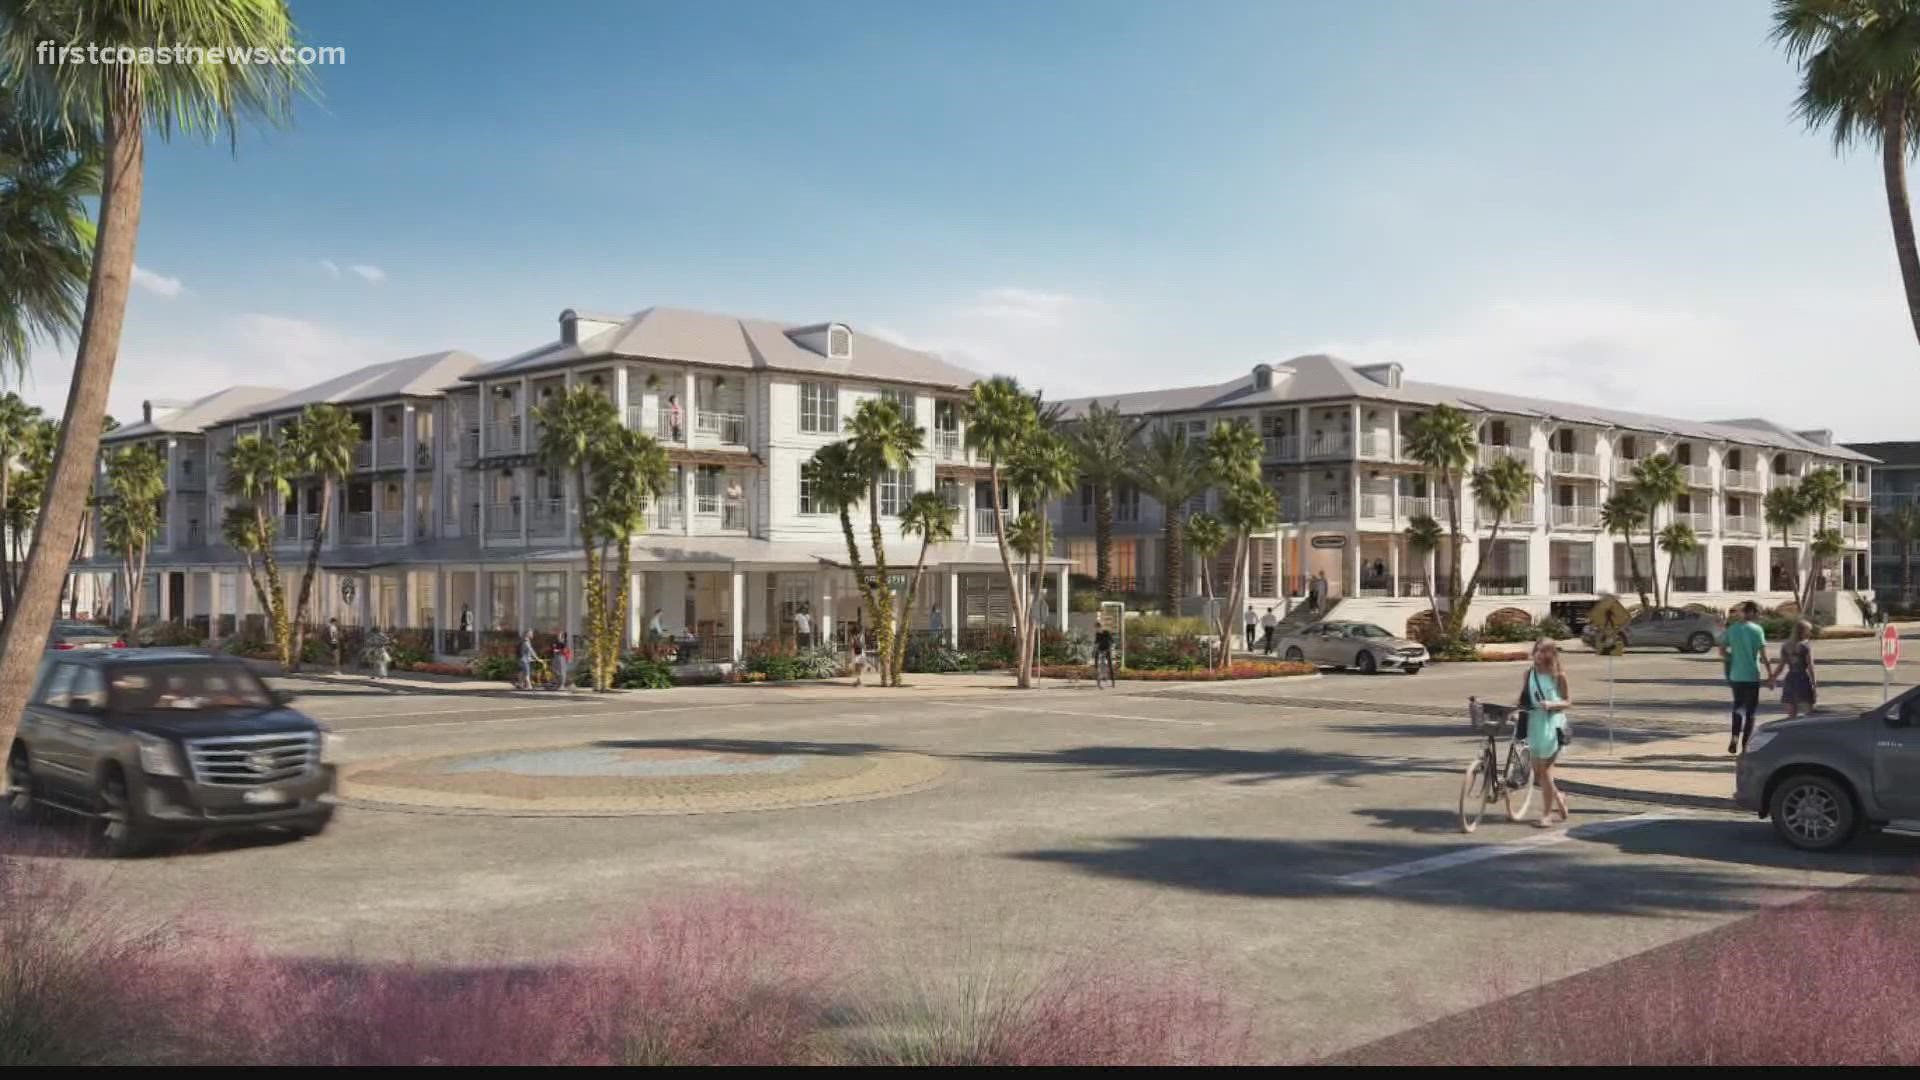 The hotel is proposed for the beach end of the street partially where the Magic Beach Motel currently stands. It will have 194 rooms, a spa, restaurant and retail.